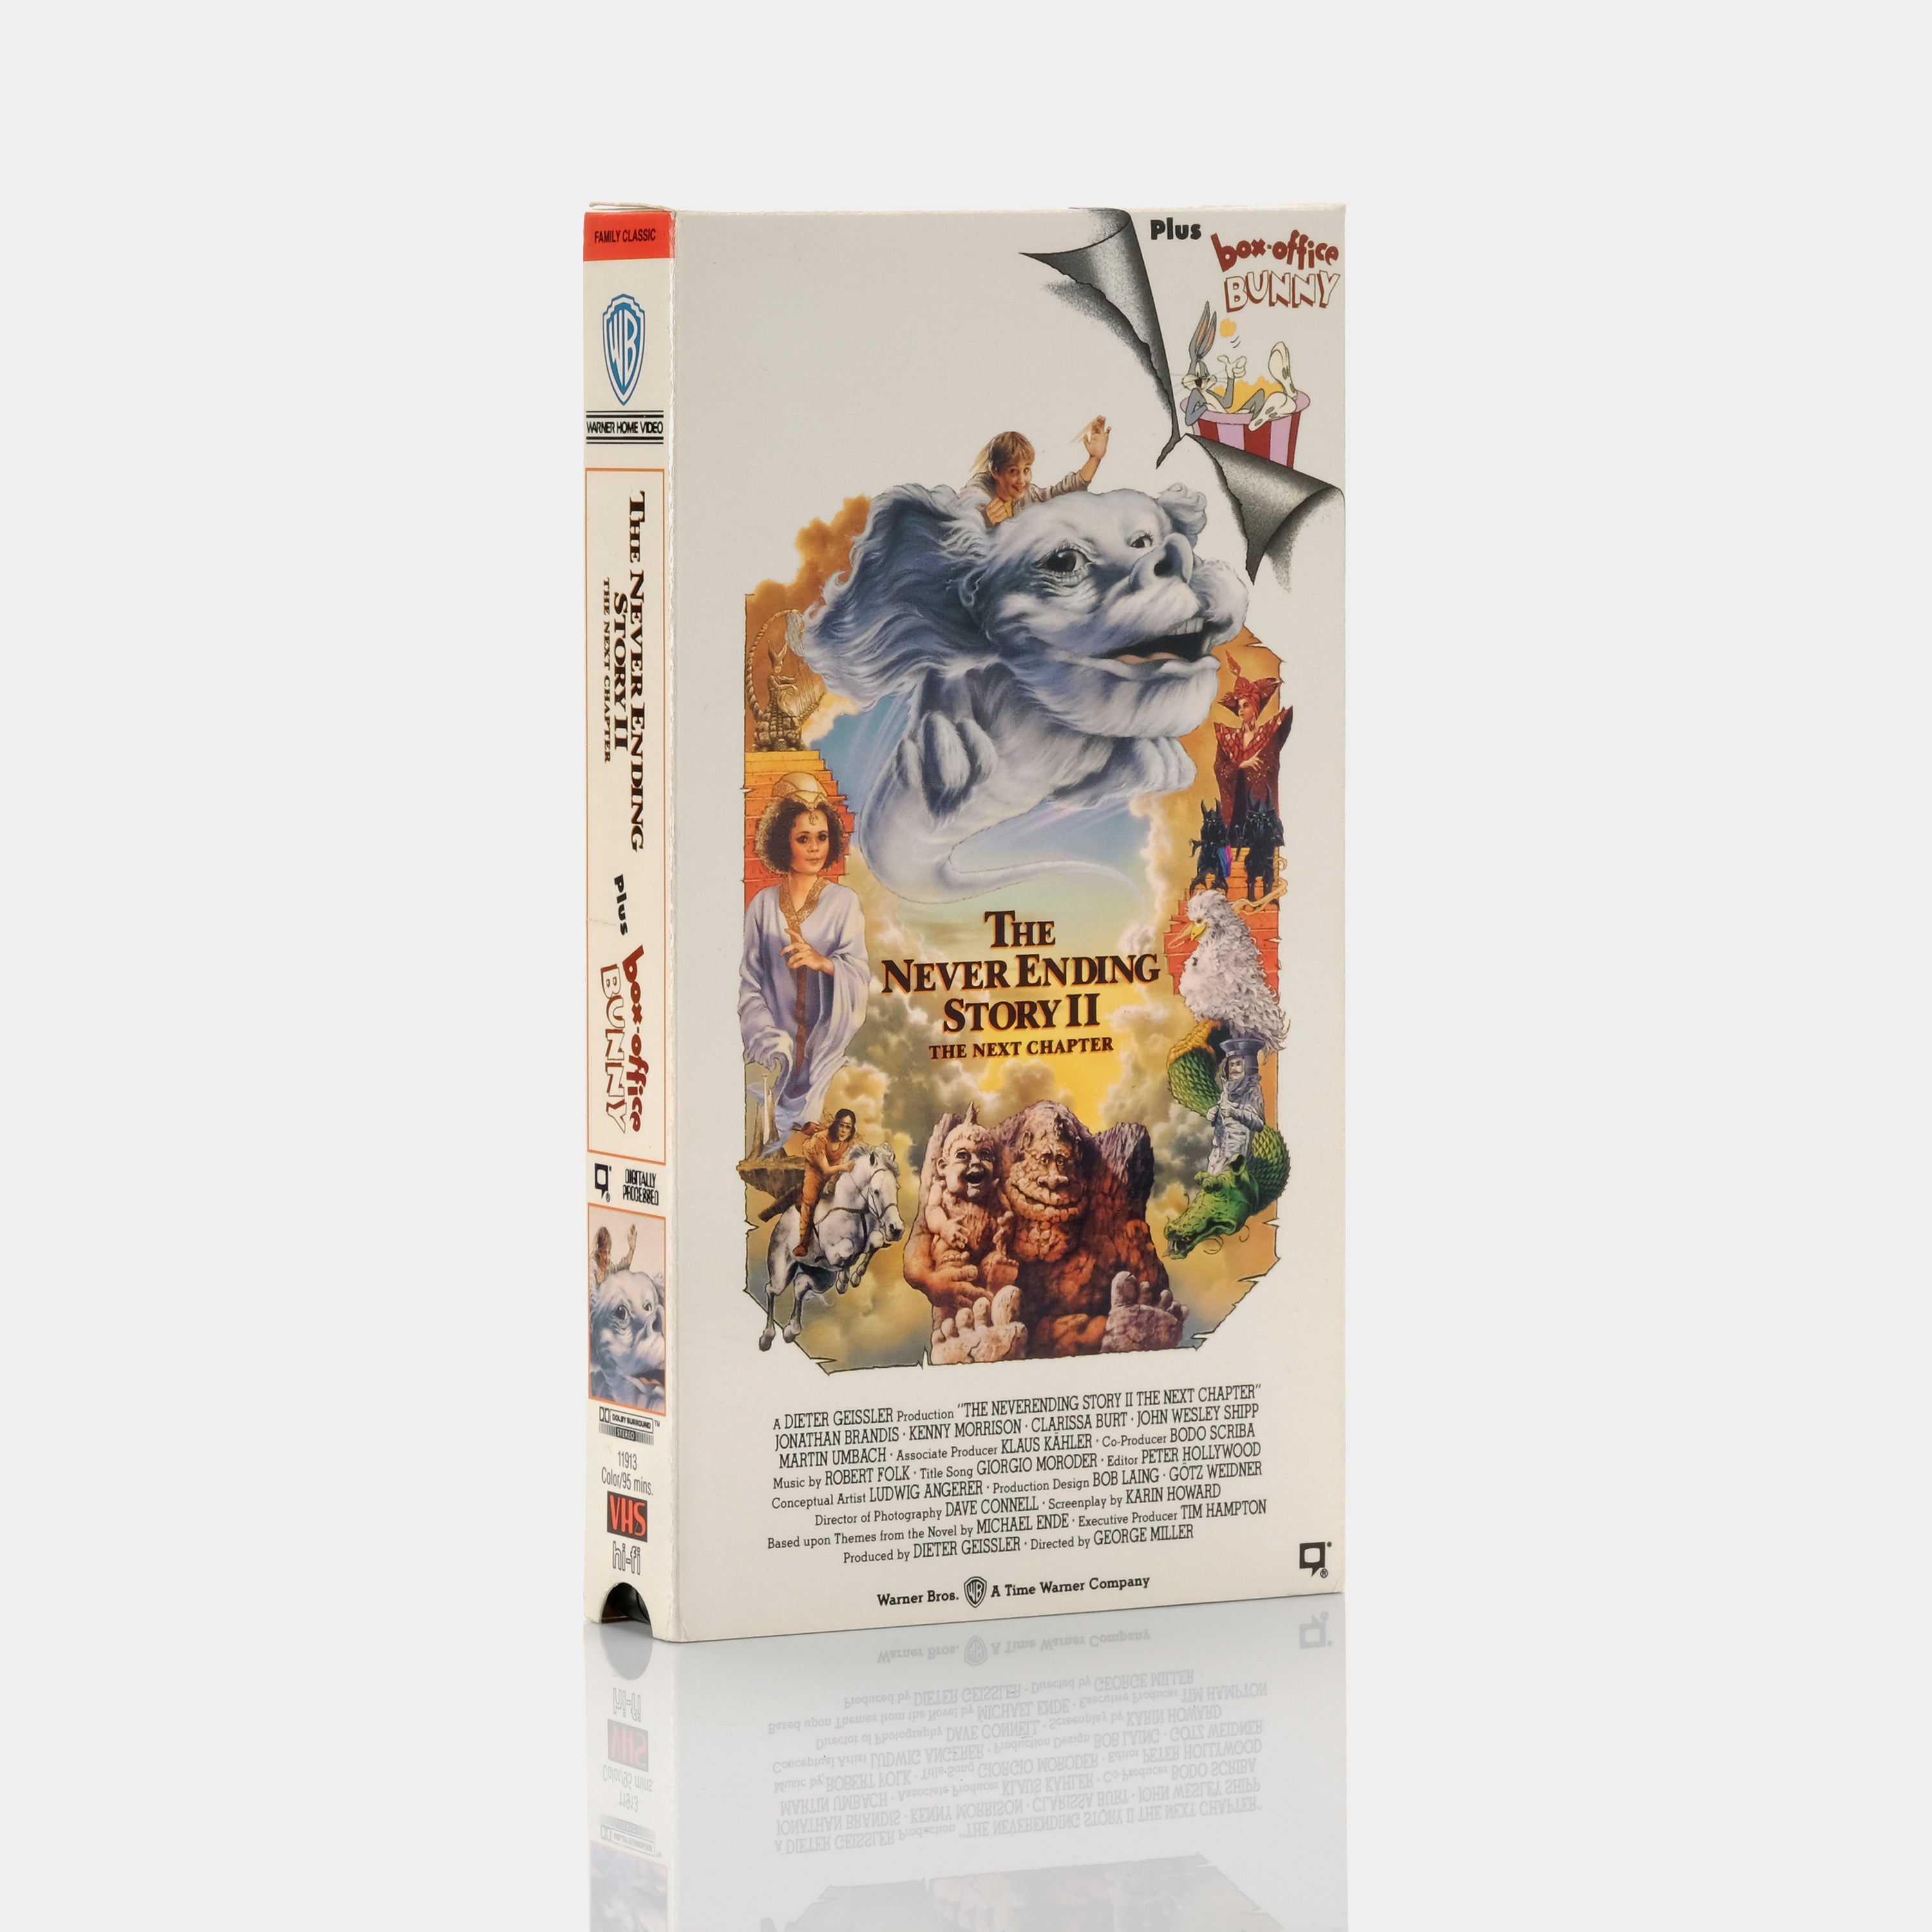 The Never Ending Story II: The Next Chapter VHS Tape